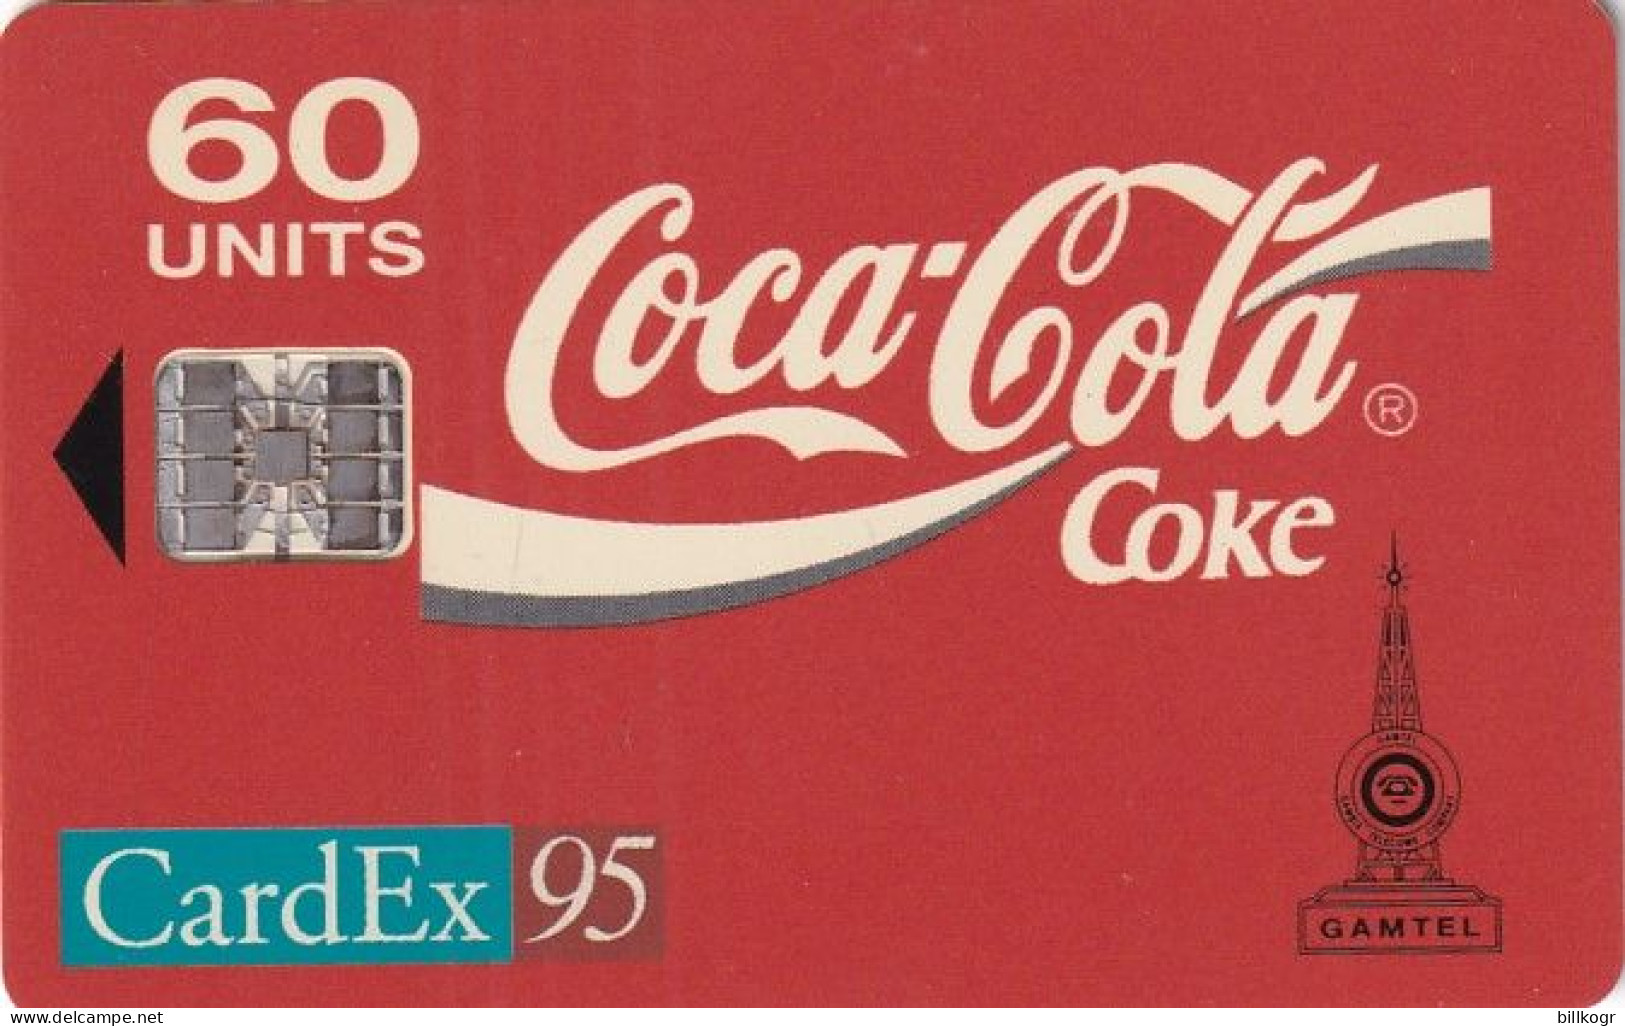 GAMBIA - Coca Cola, CardEx 95, Used - Gambia